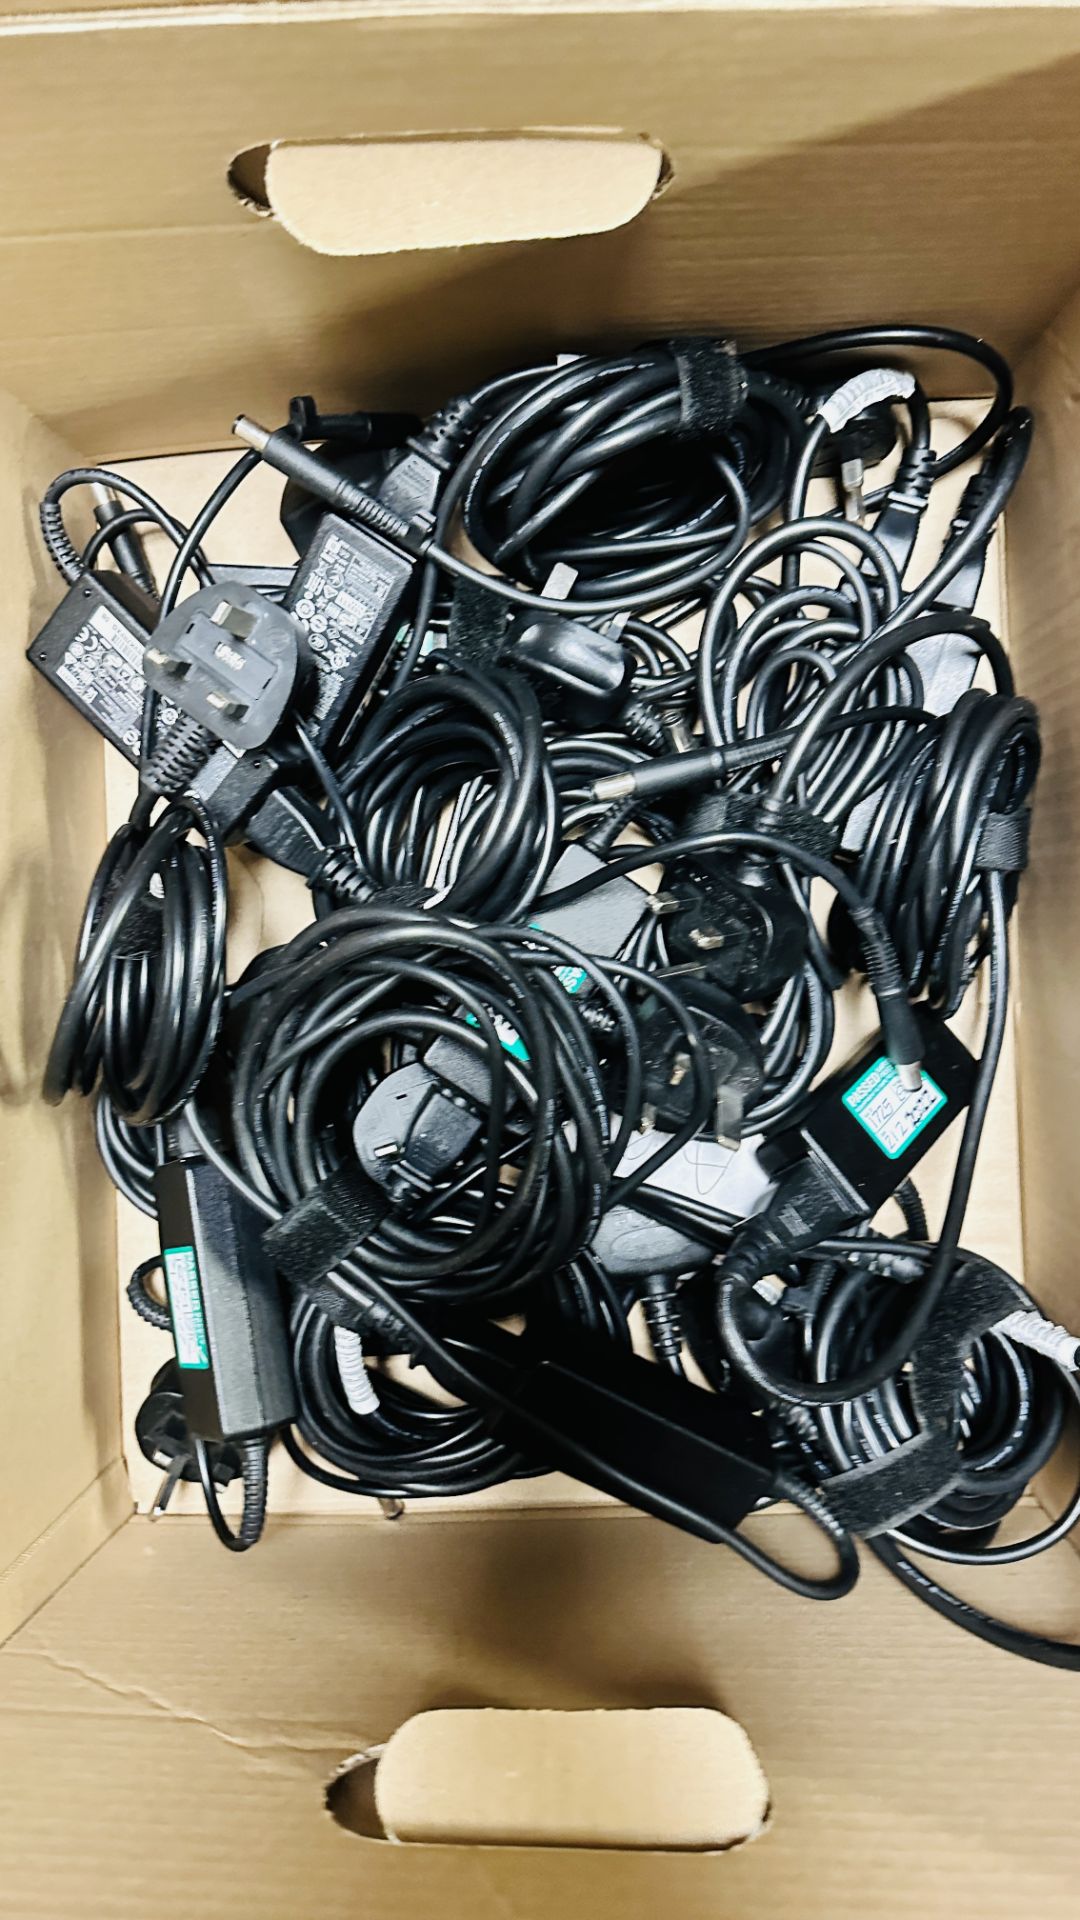 36 X LAPTOP CHARGERS FOR HP LAPTOPS MANY HP 65W AND 45W EXAMPLES - SOLD AS SEEN. - Image 3 of 9